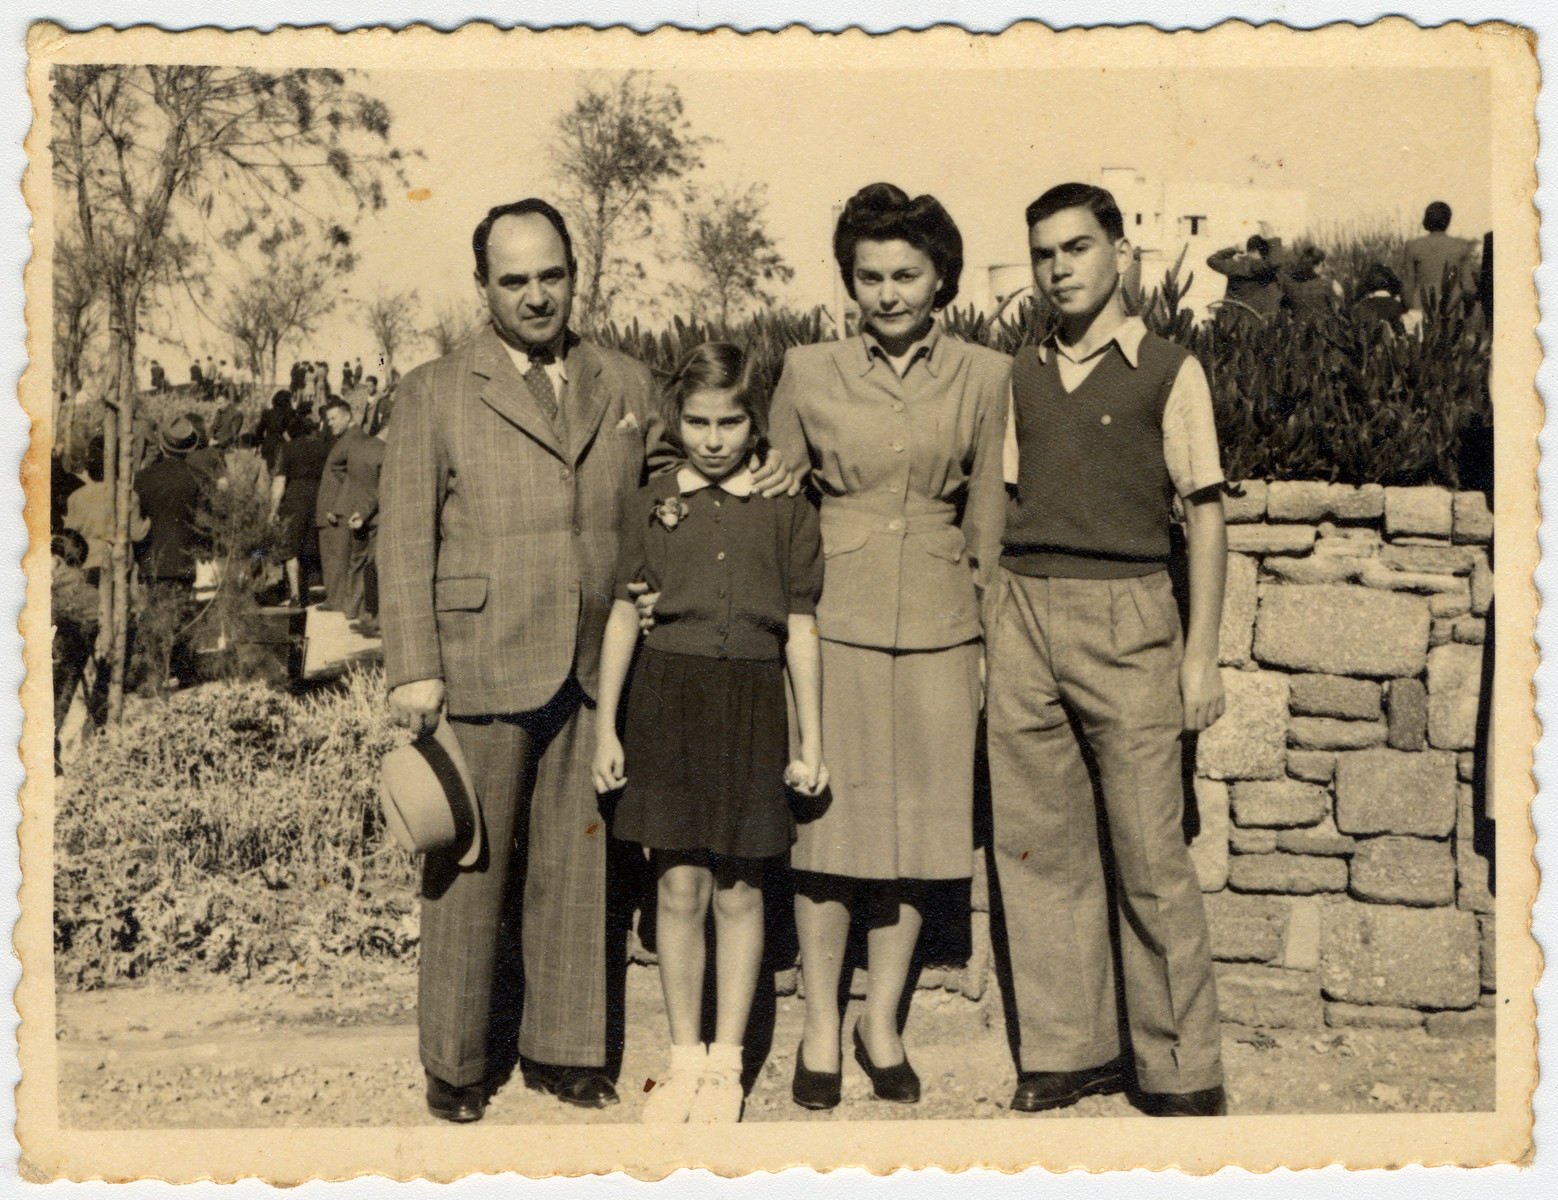 The Menn family poses by a stone wall in Tel Aviv where they settled after escaping from Lithuania.

Pictured from left to right are David, Bella, Regina and Julius Menn.